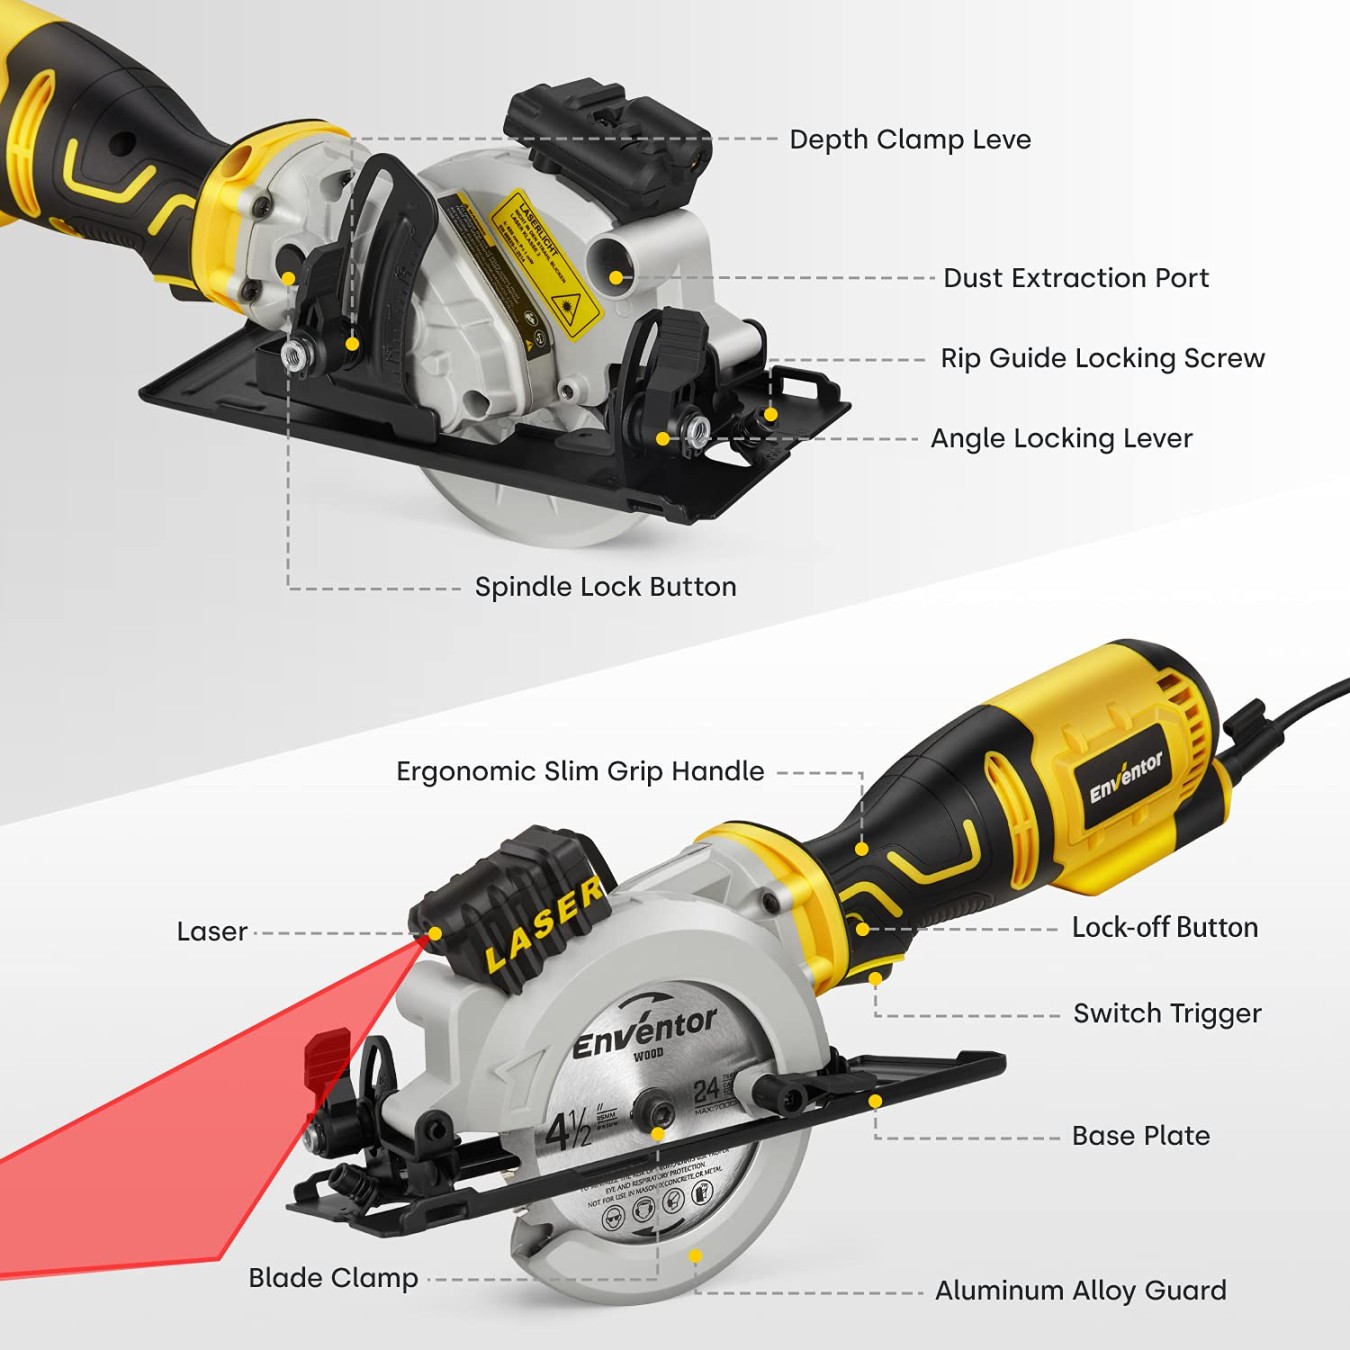 mini-circular-saw-enventor-w-handheld-circular-saw-with-saw-blades-mini-handheld-circular-saw-with-guide-rail-amp-laser-guide-rpm-ideal Best Small Circular Saw Reviews In 2024: Top Compact Options For Precision Cuts picture